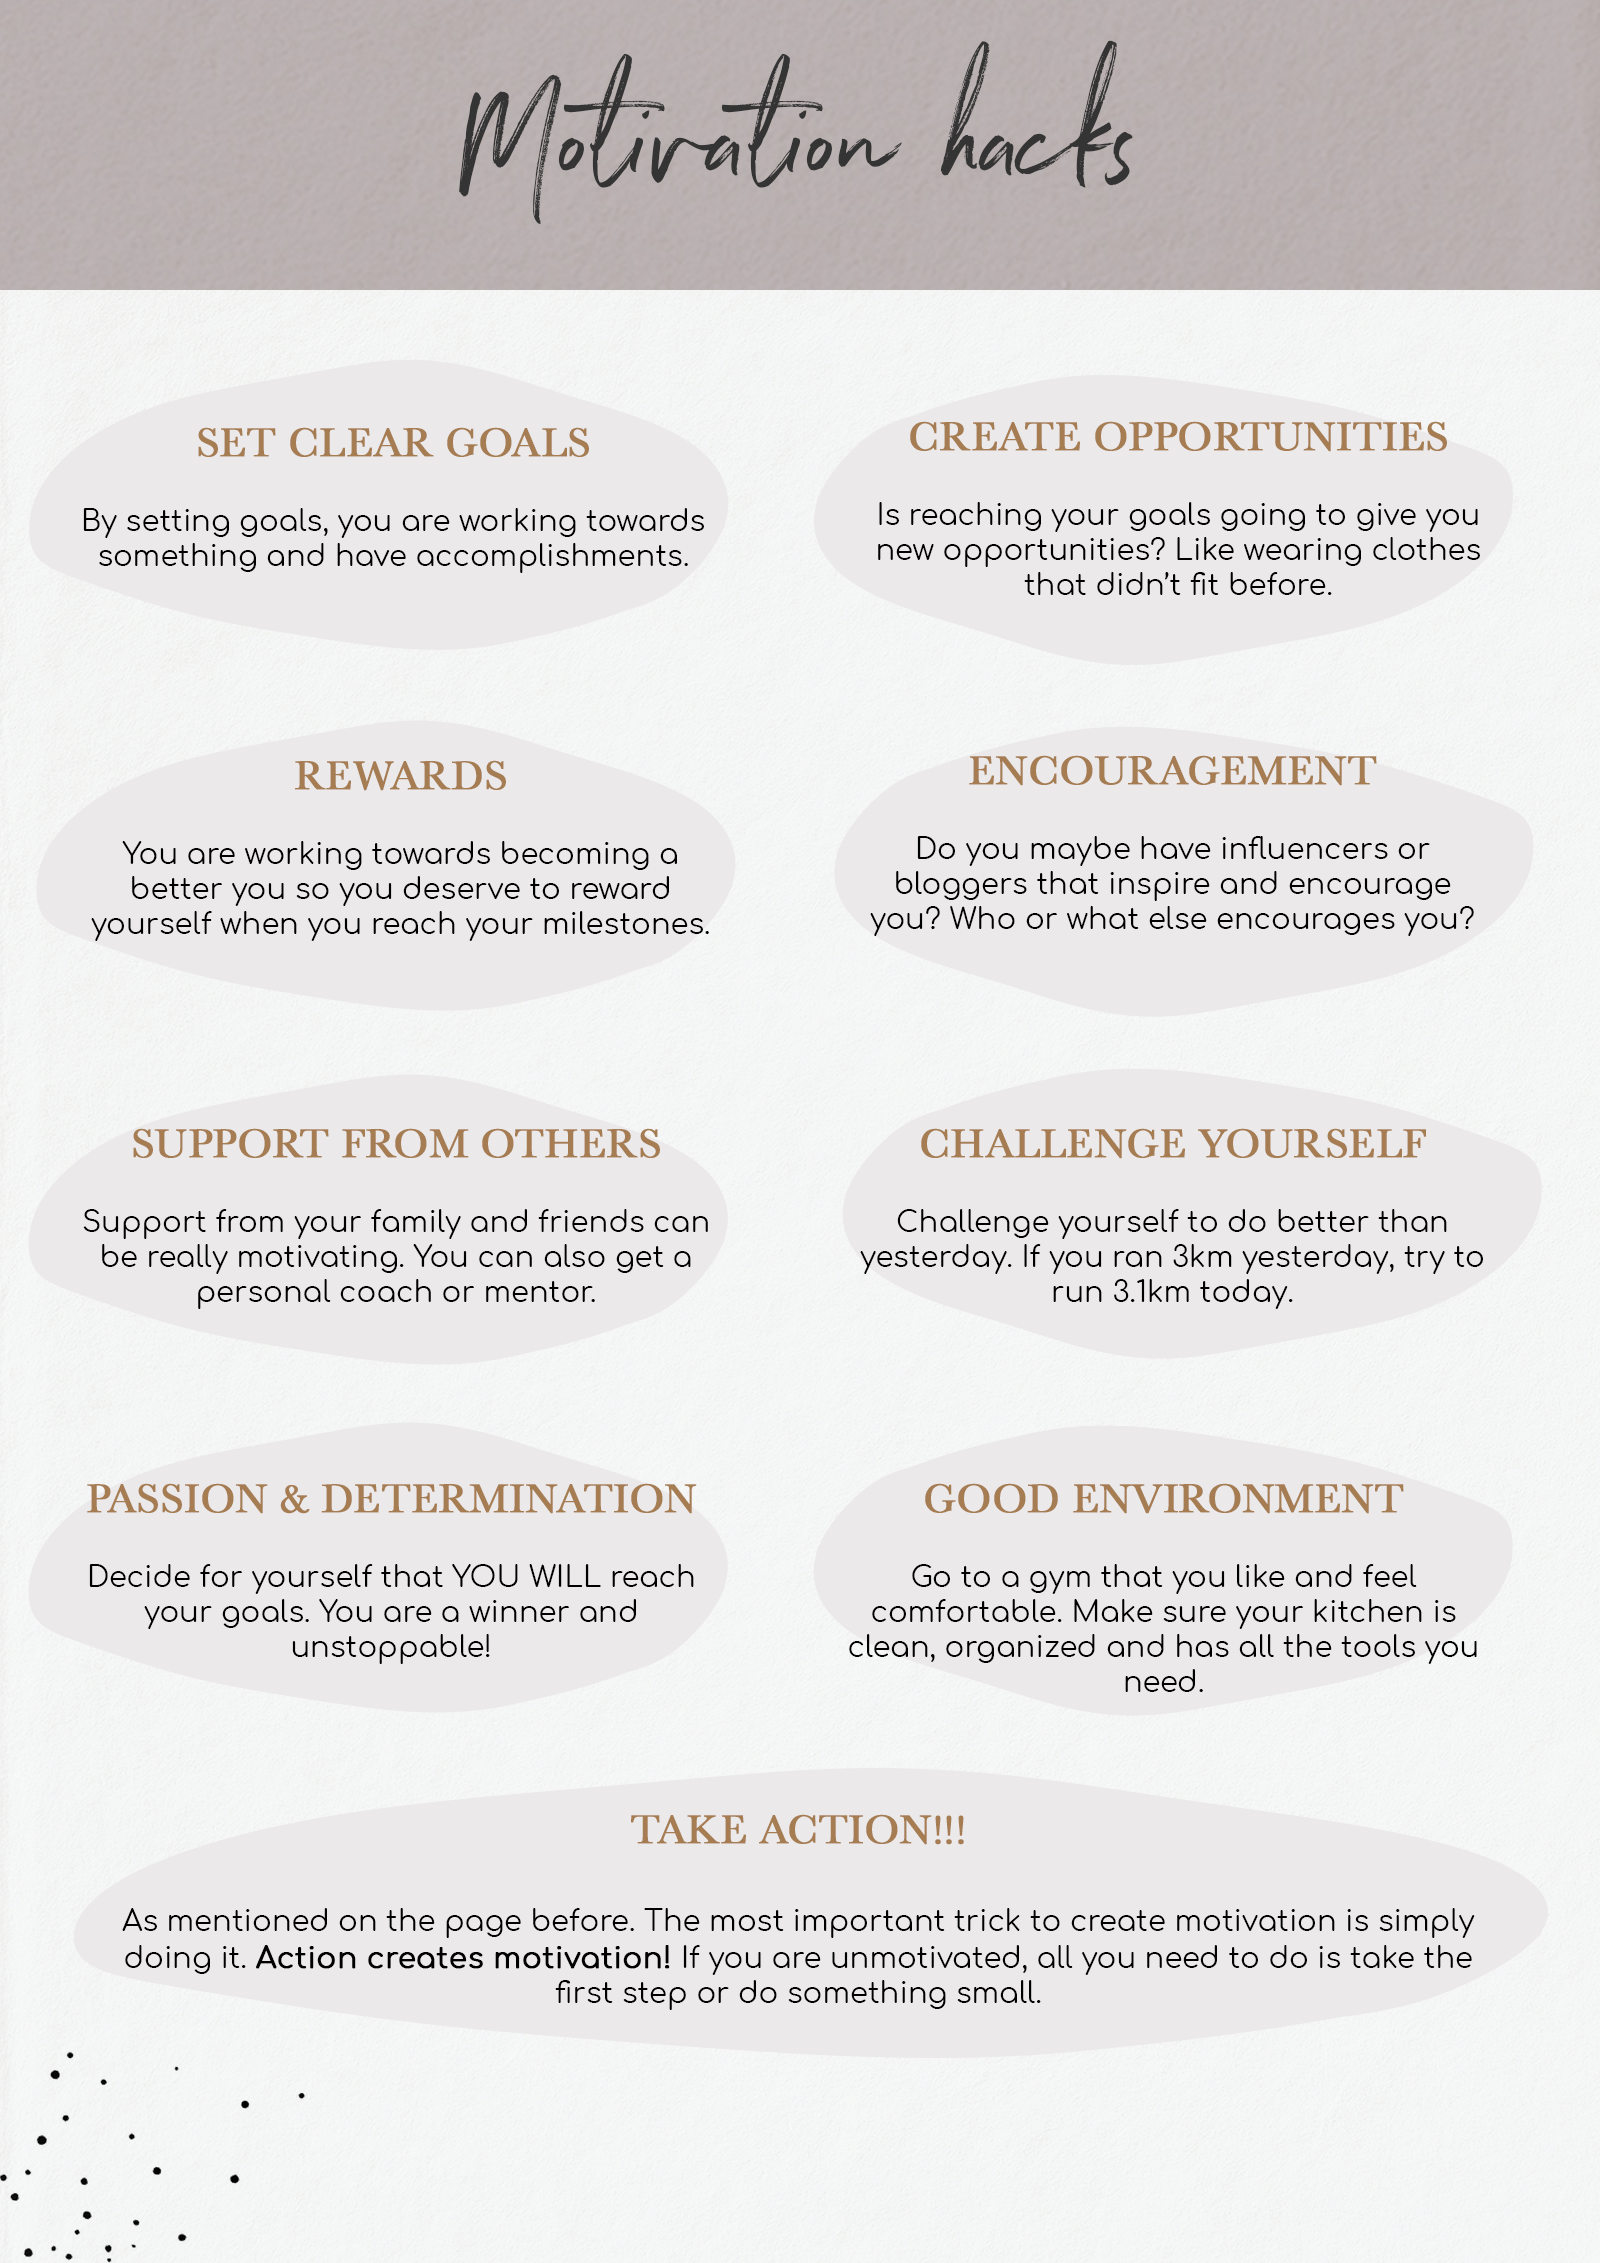 2.12-how-to-stay-motivated.-motivation-hacks-copy-2.png